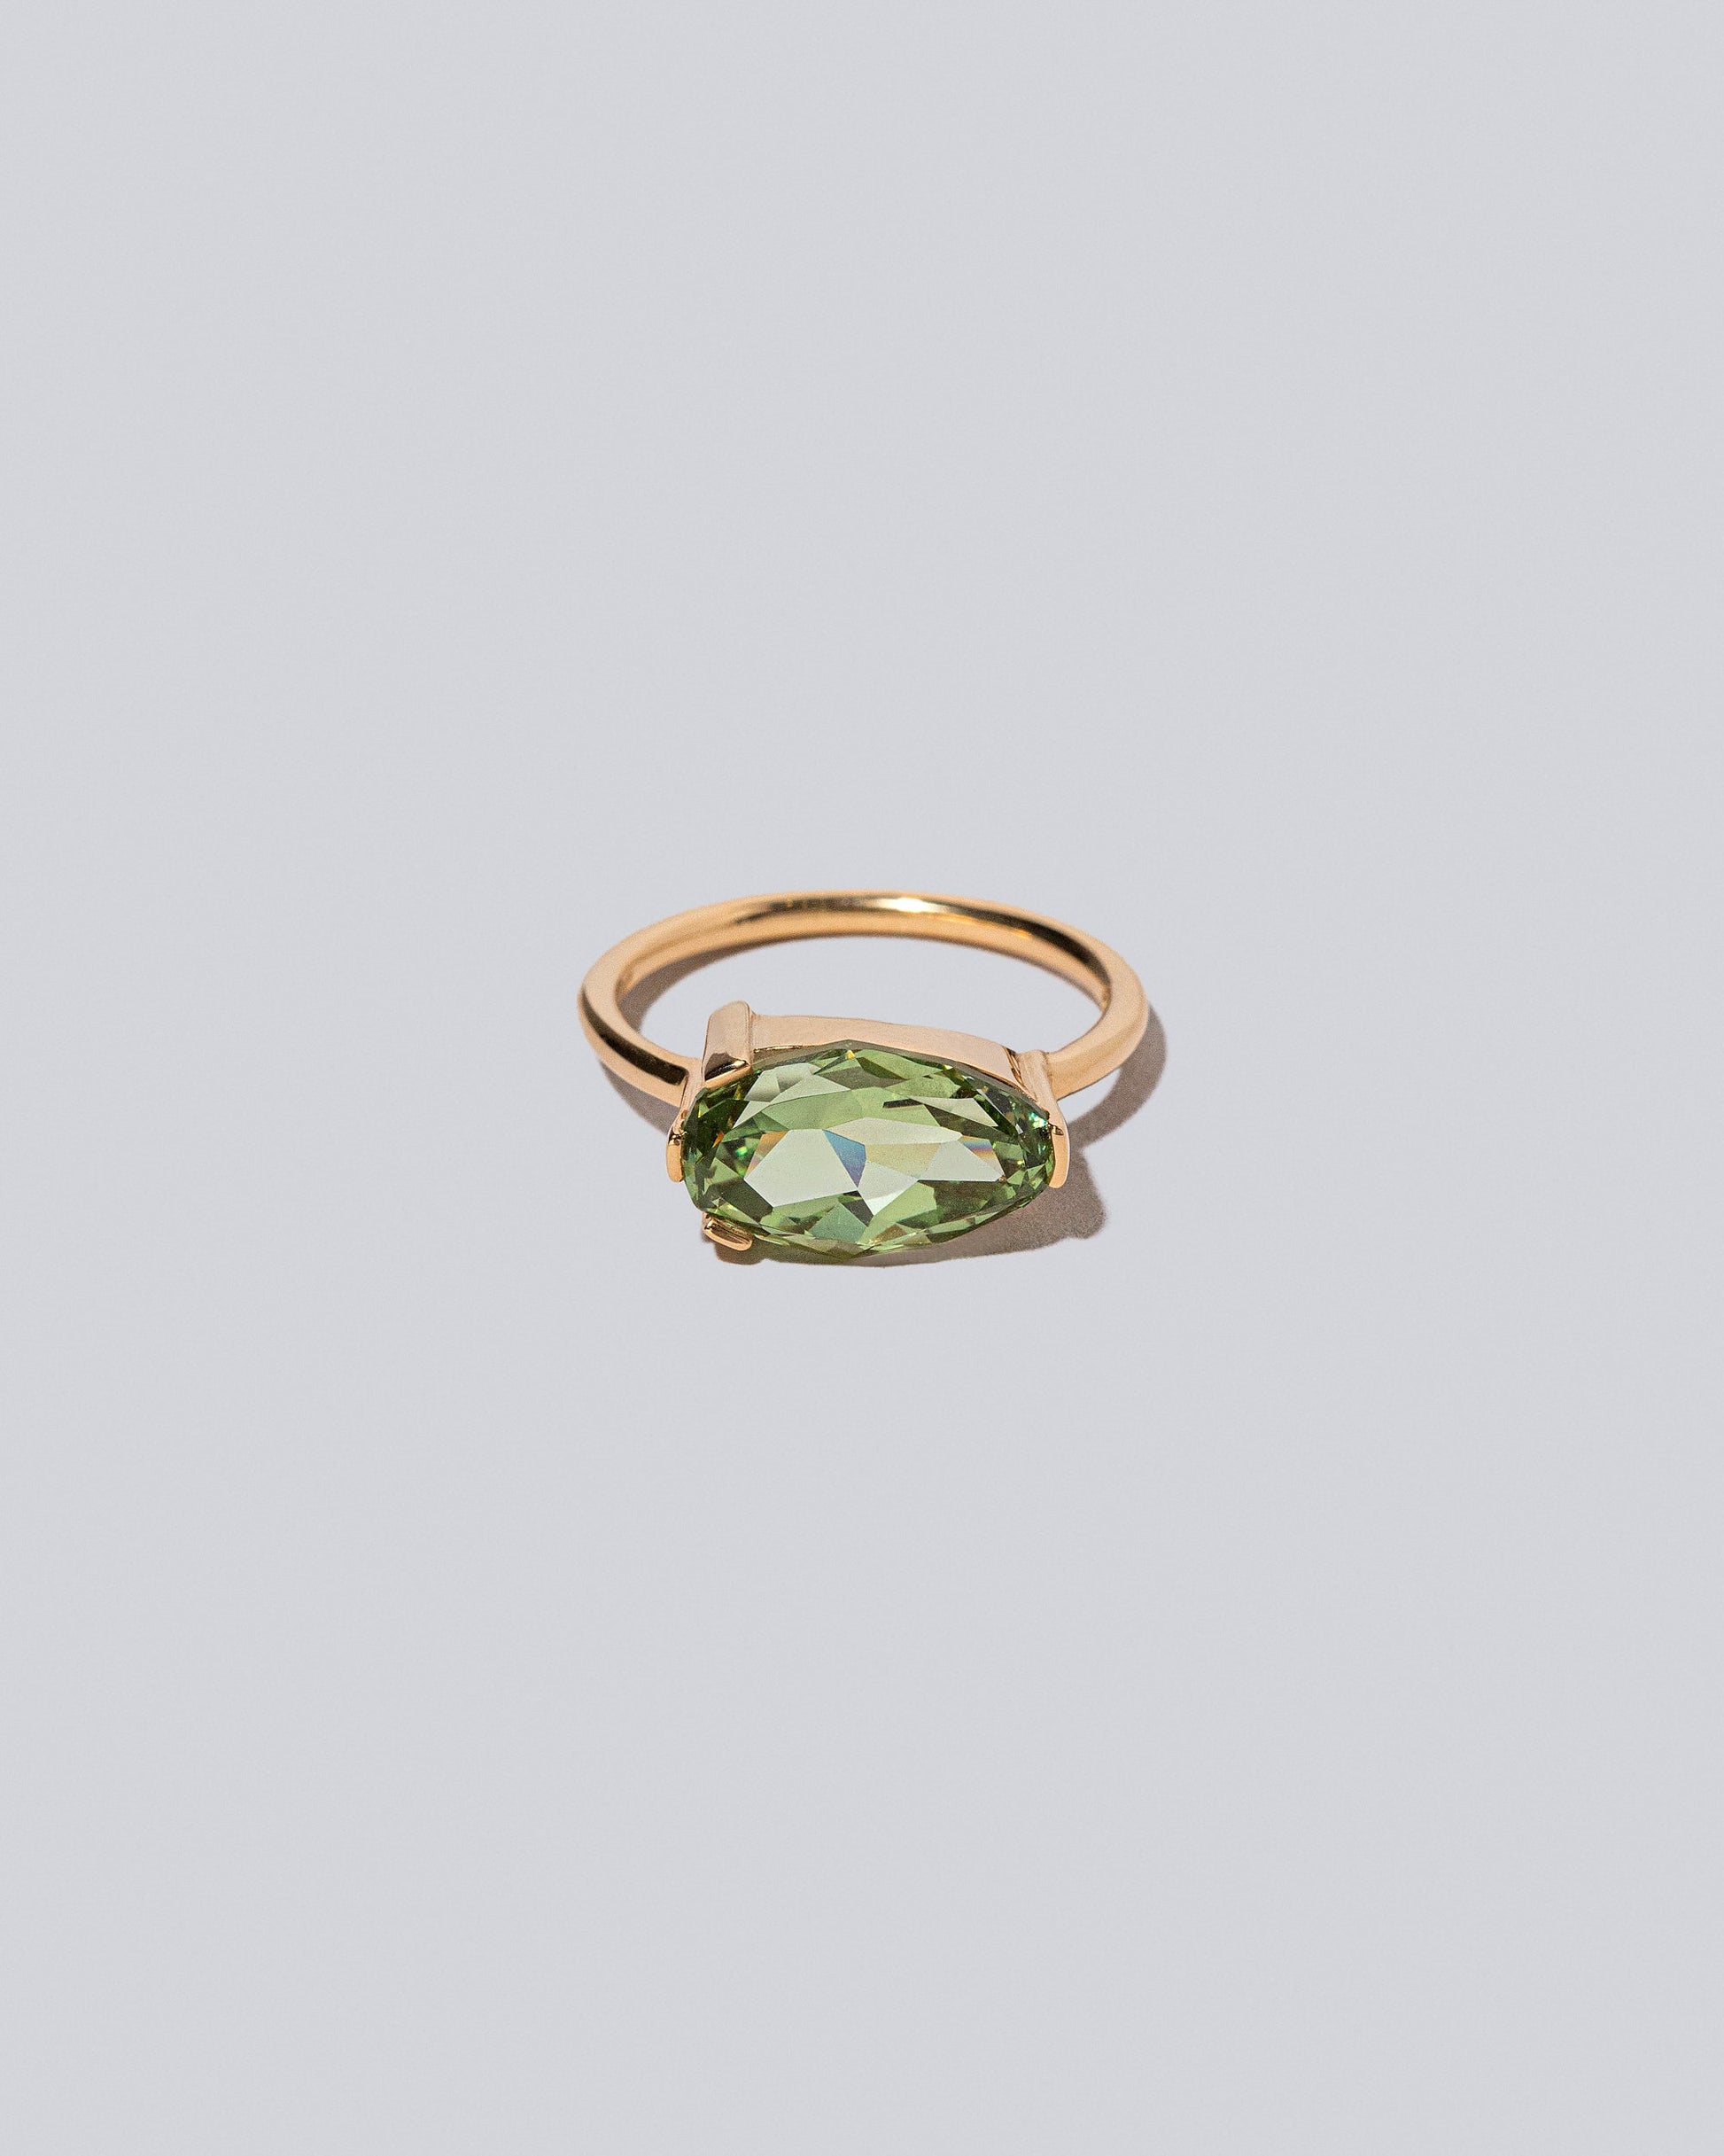 Product photo of the Junco Ring on a light color background 